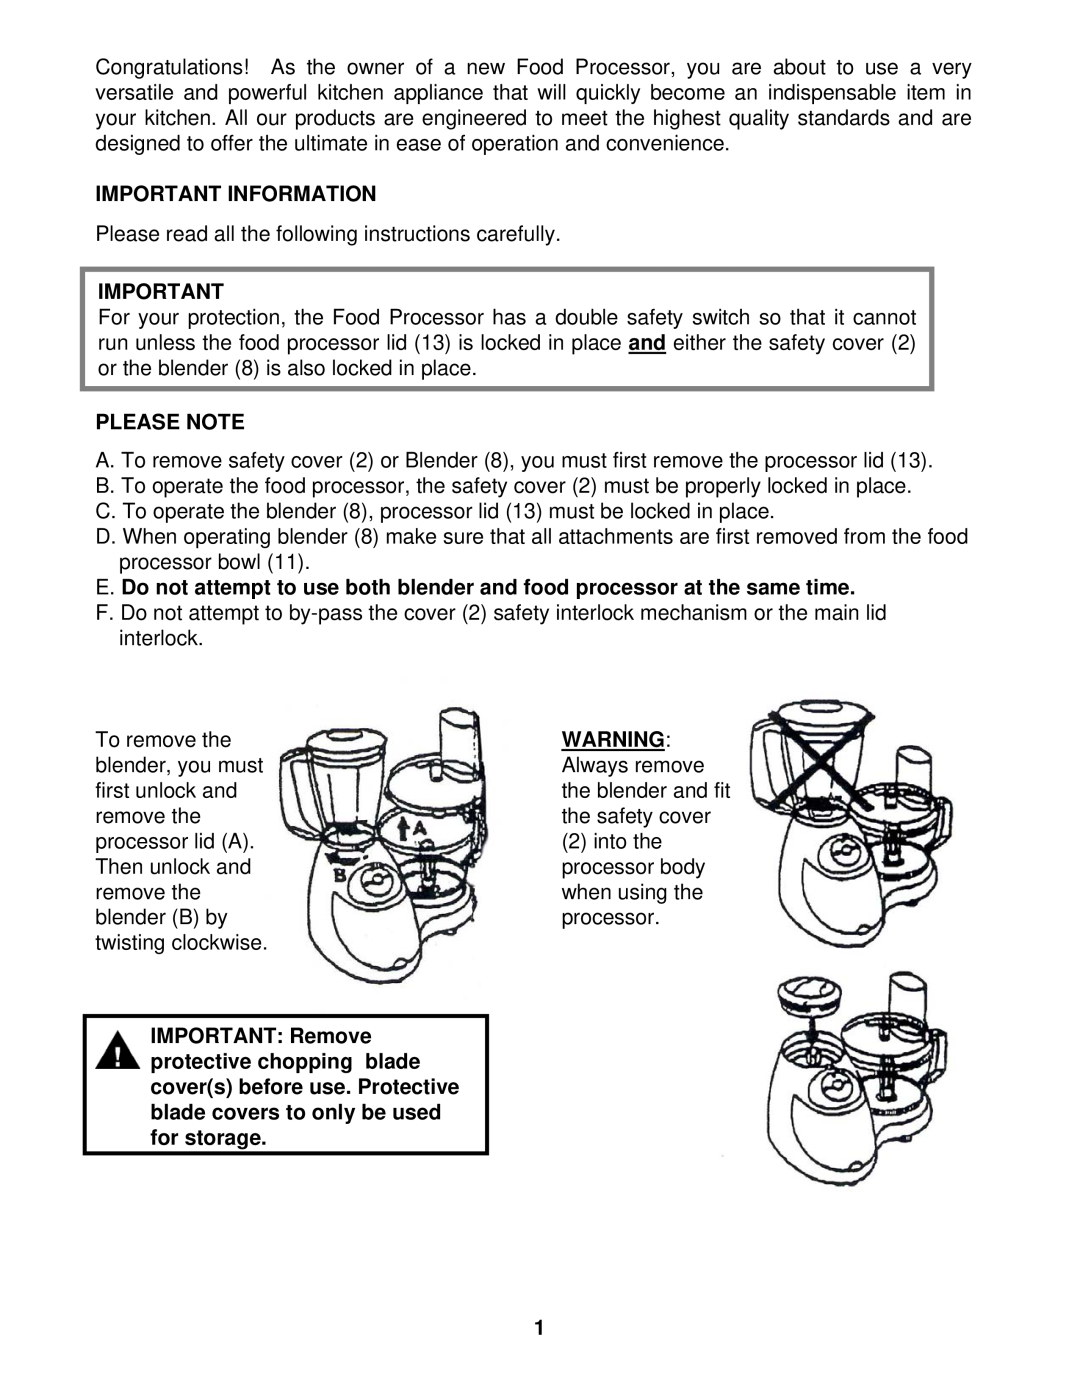 Euro-Pro EP90E instruction manual Important Information, Please Note 